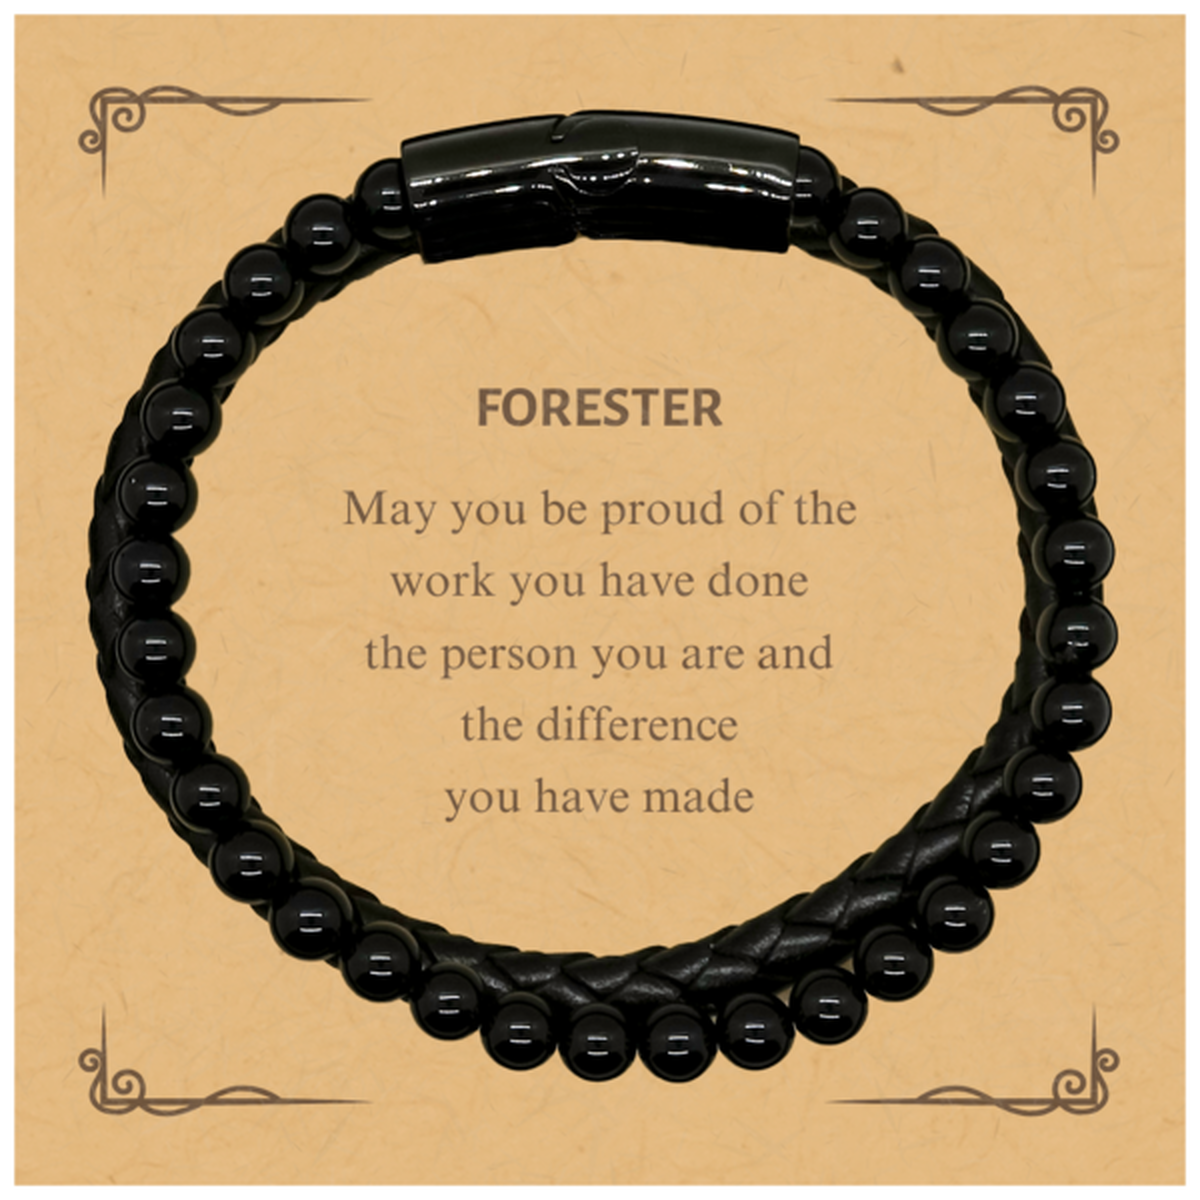 Forester May you be proud of the work you have done, Retirement Forester Stone Leather Bracelets for Colleague Appreciation Gifts Amazing for Forester